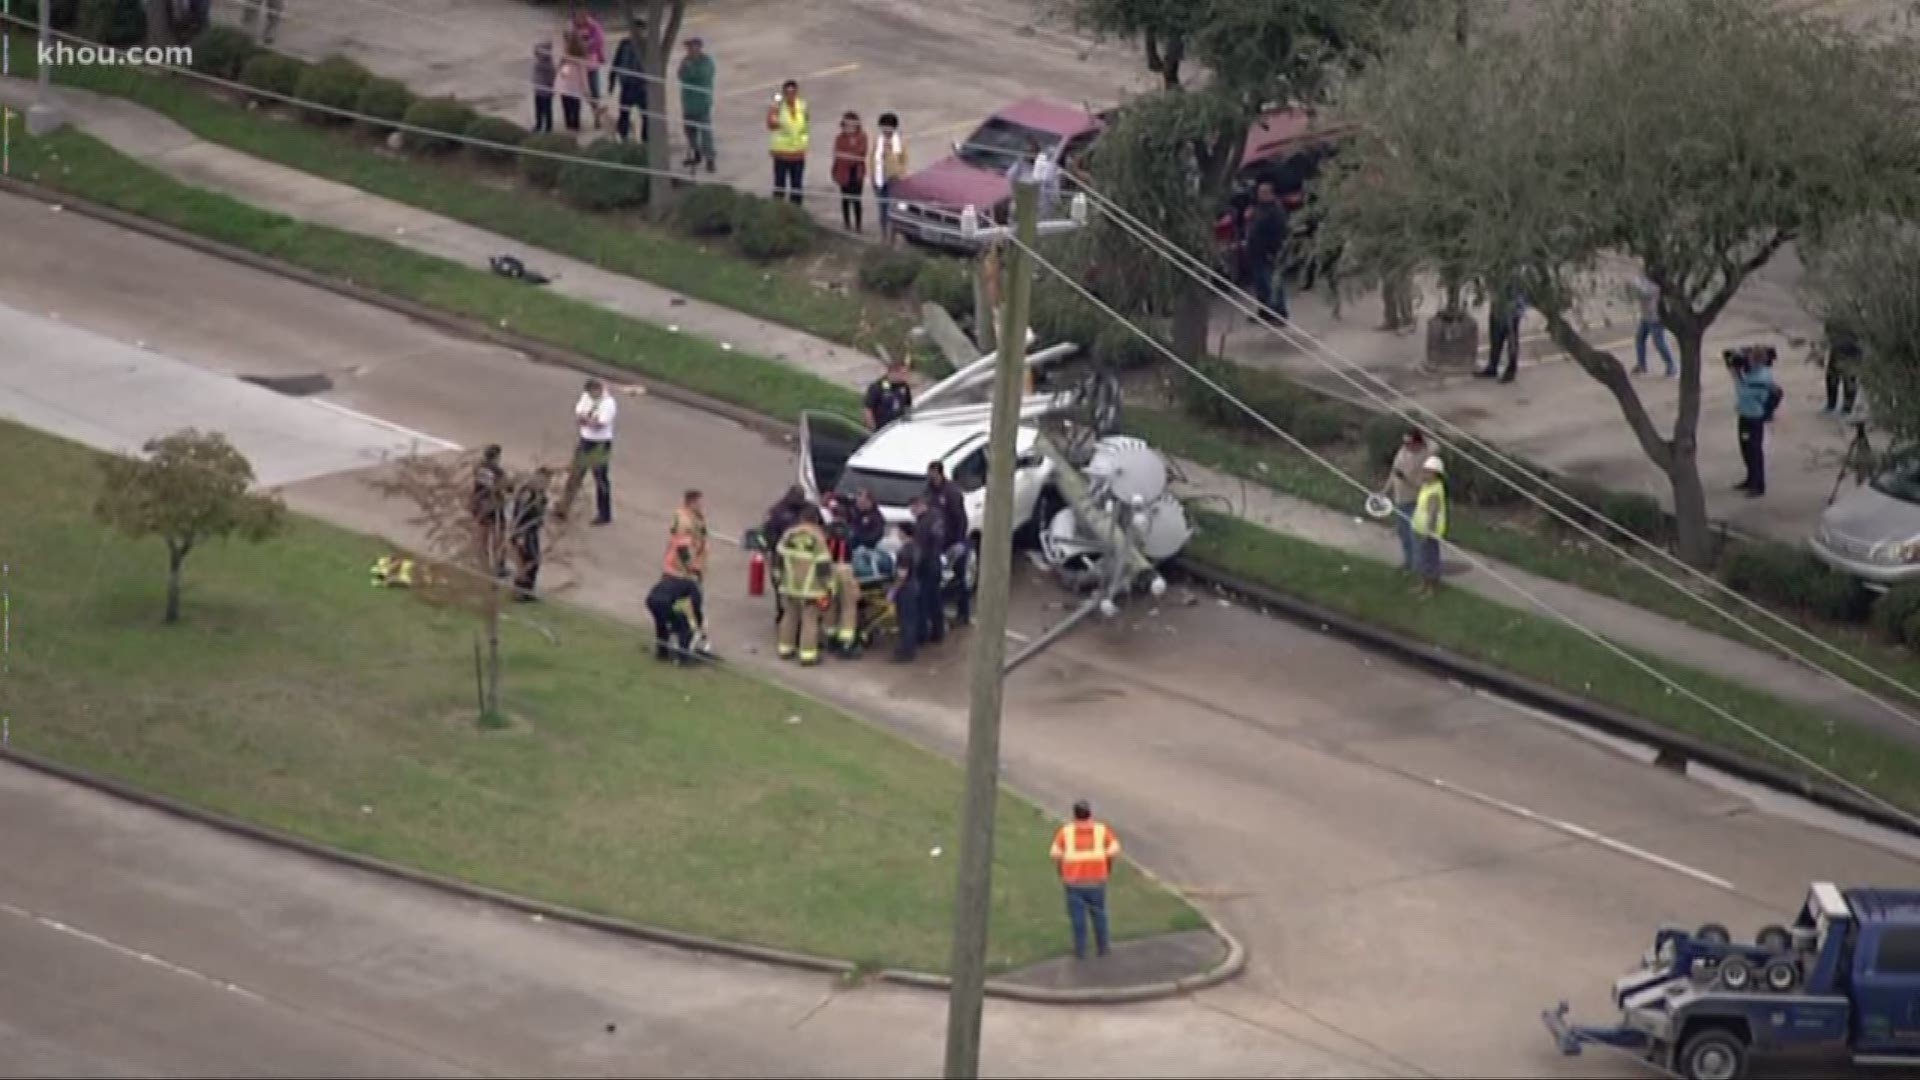 An SUV crashed into a utility pole Friday in southwest Houston.